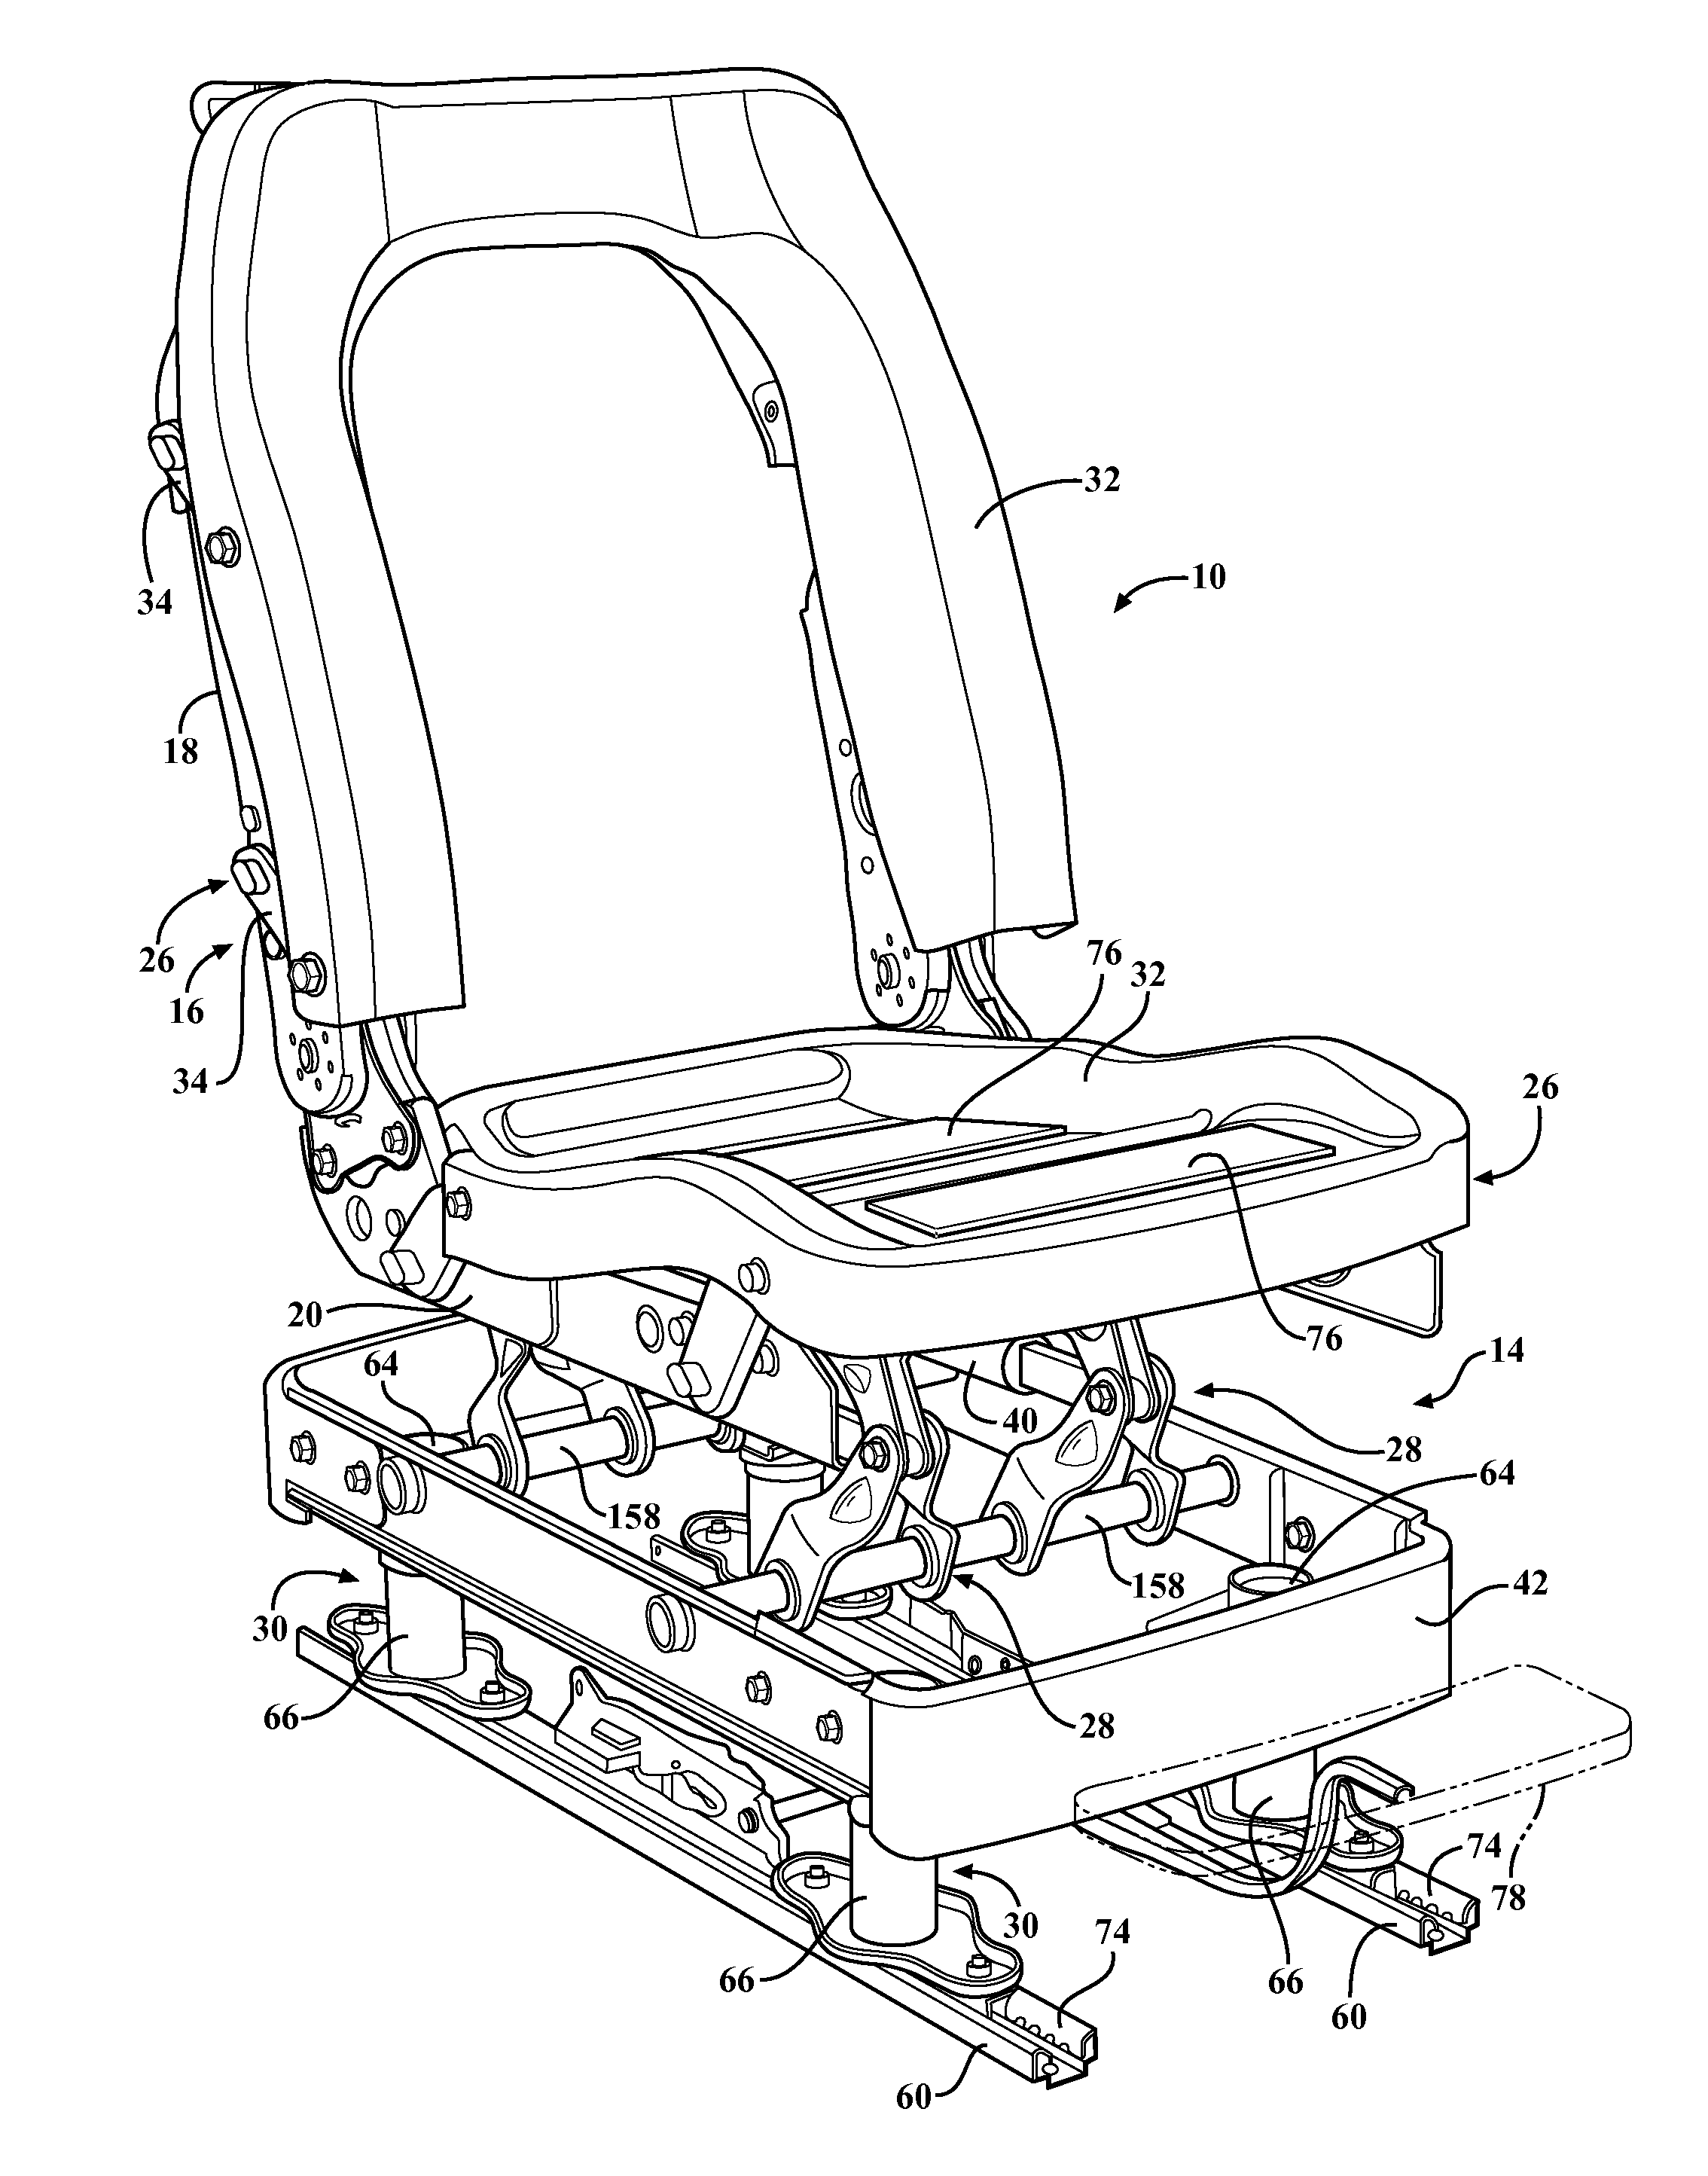 Blast Attenuation Device For Absorbing Force Between An Occupant And A Vehicle